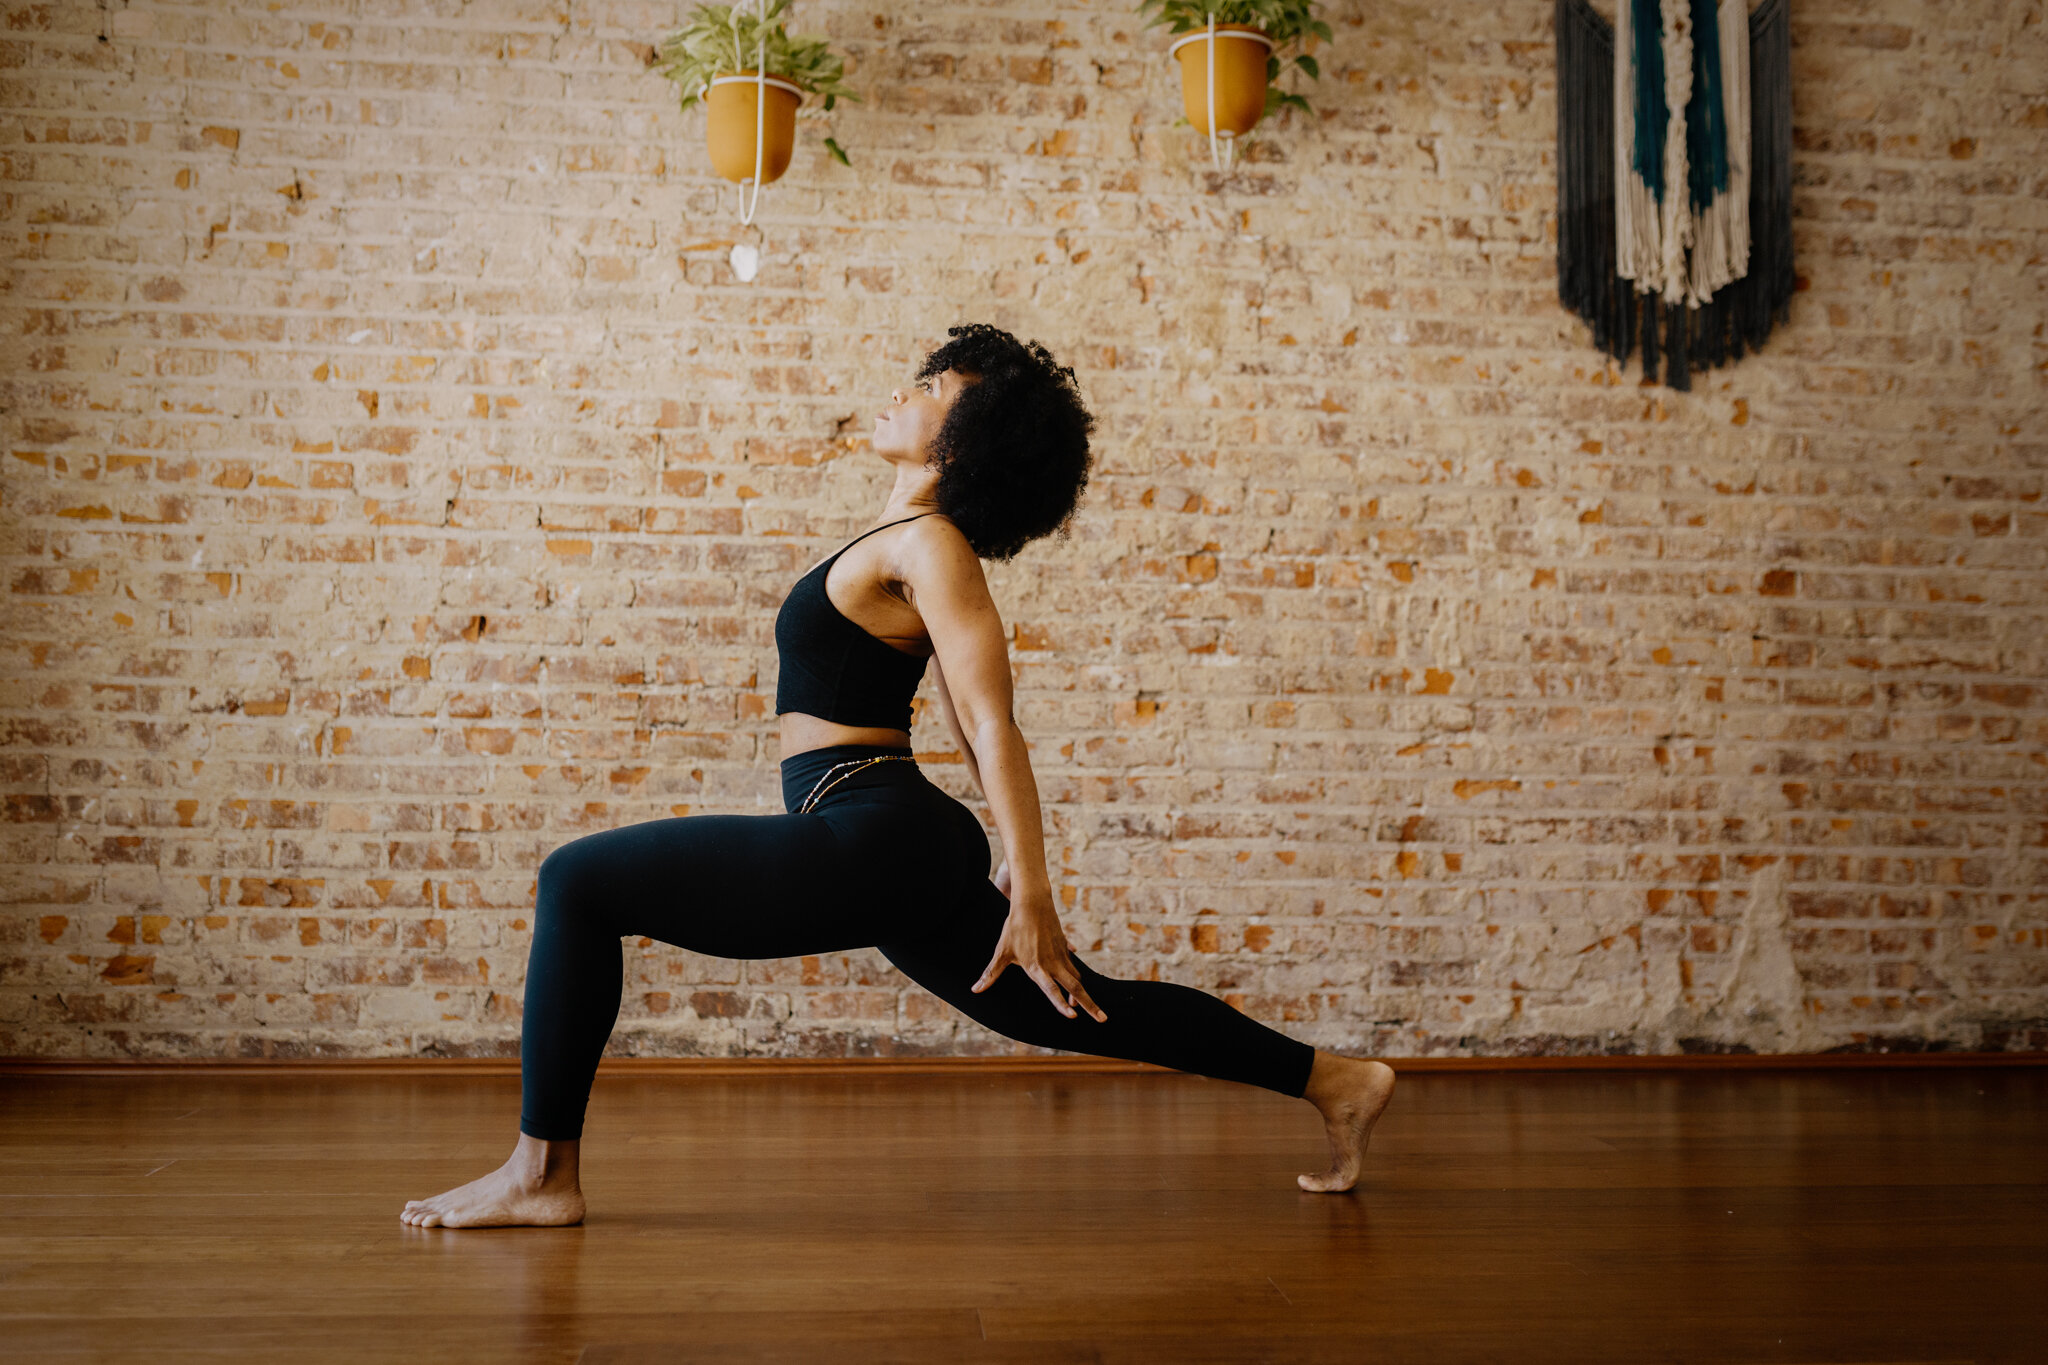 UVA Alumna Creates a Yoga Practice for Students Like Her